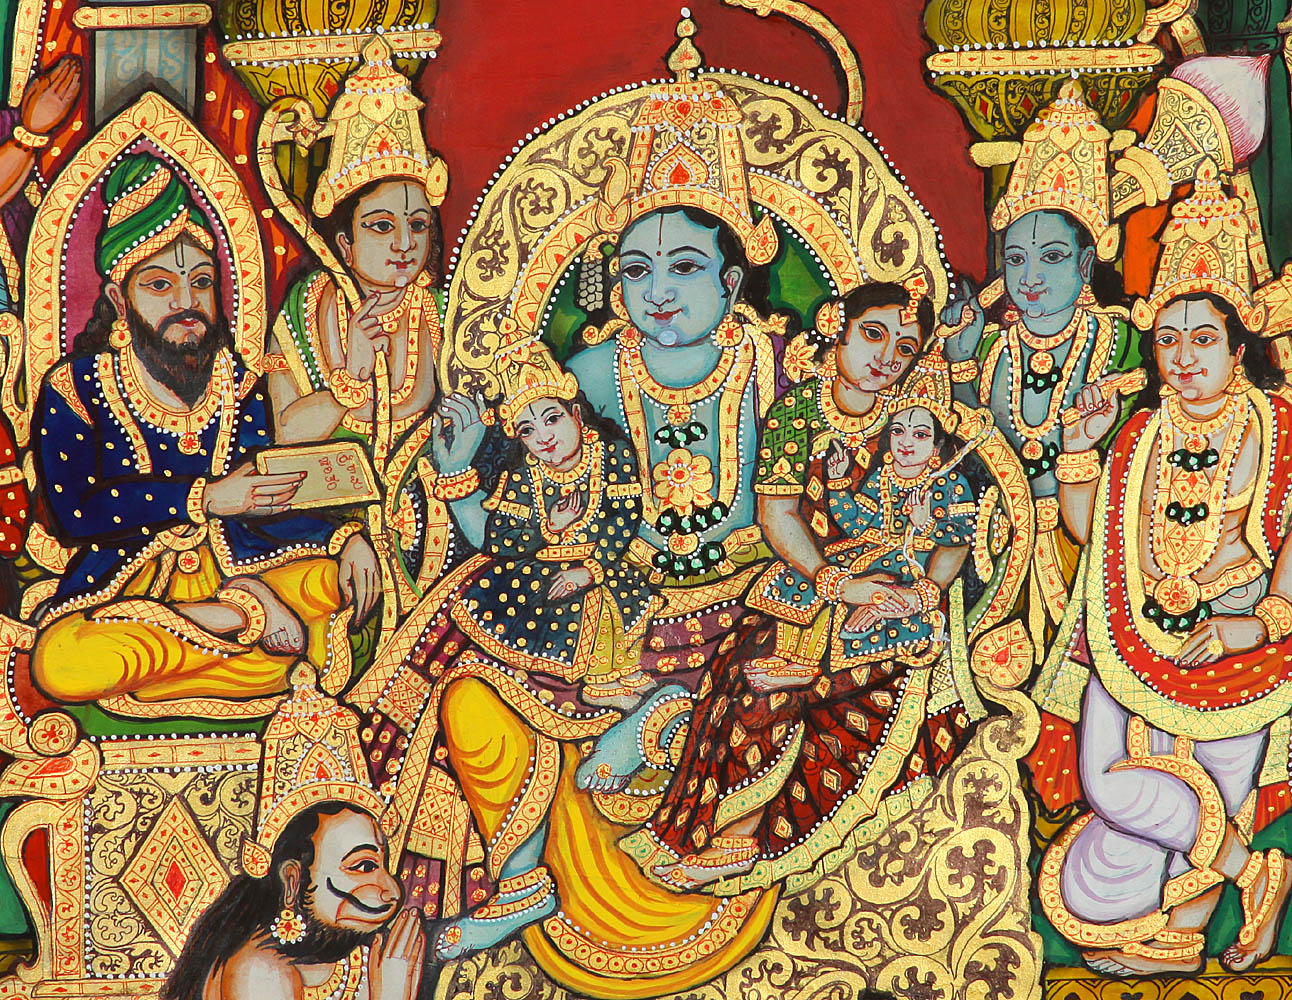 Lord Rama Durbar with His Sons Luv and Kush | Exotic India Art